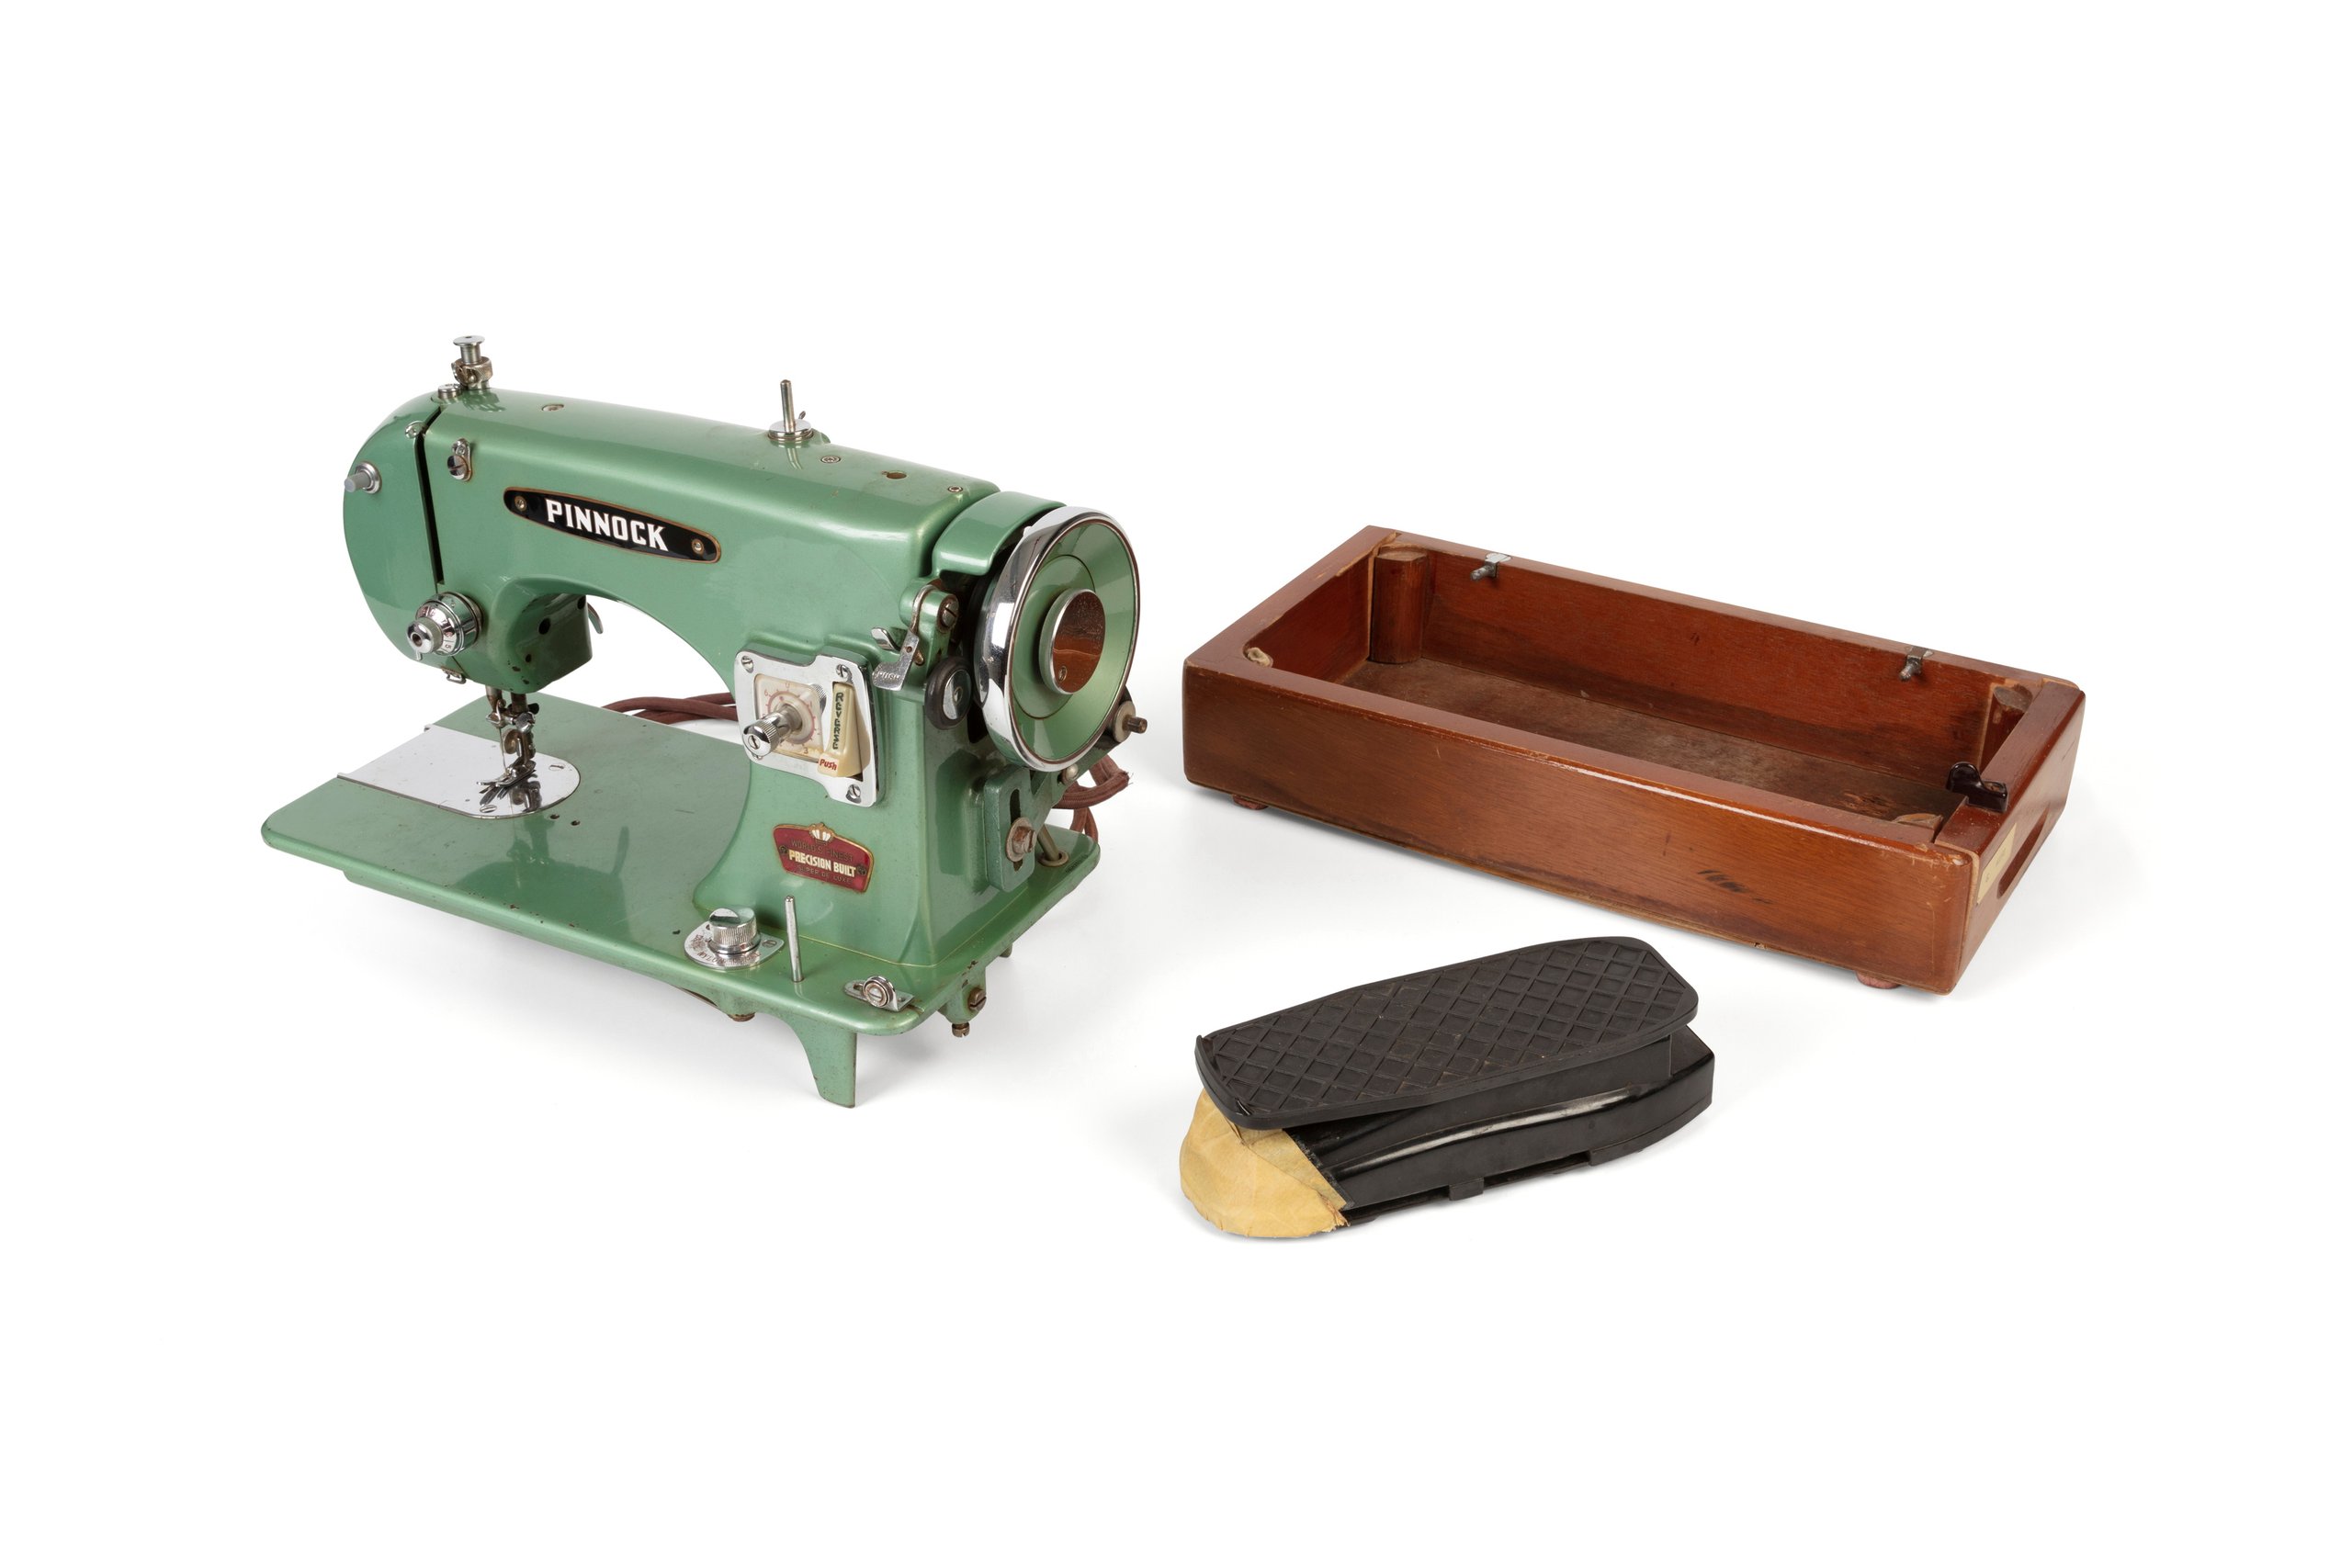 Sewing machine and accessories by Pinnock